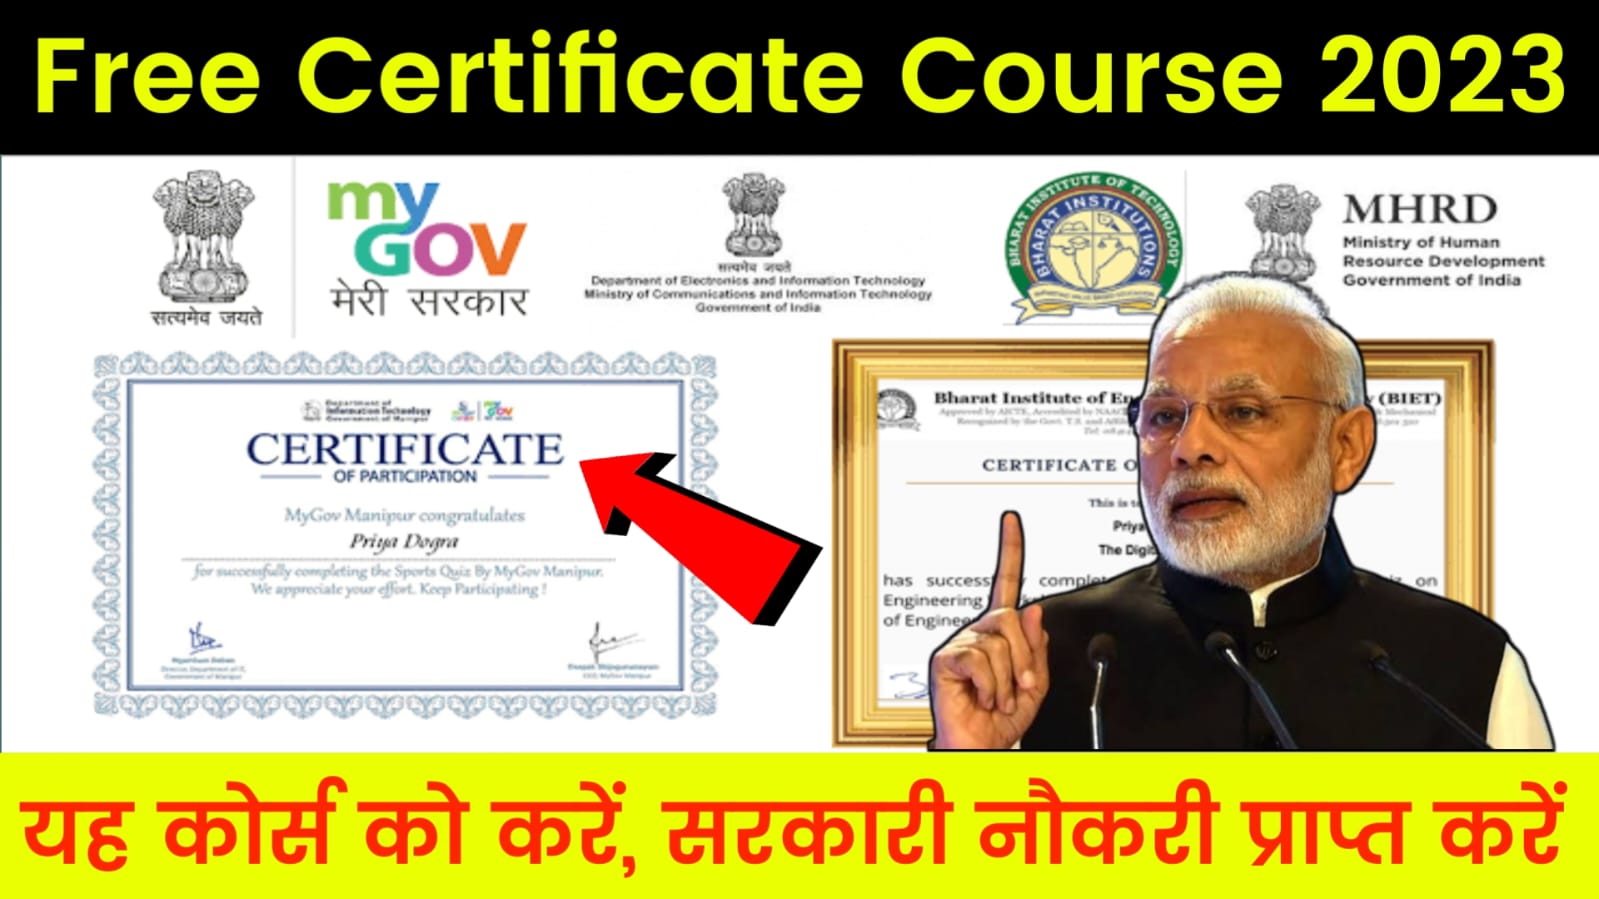 Free Certificate Course By Government 2023